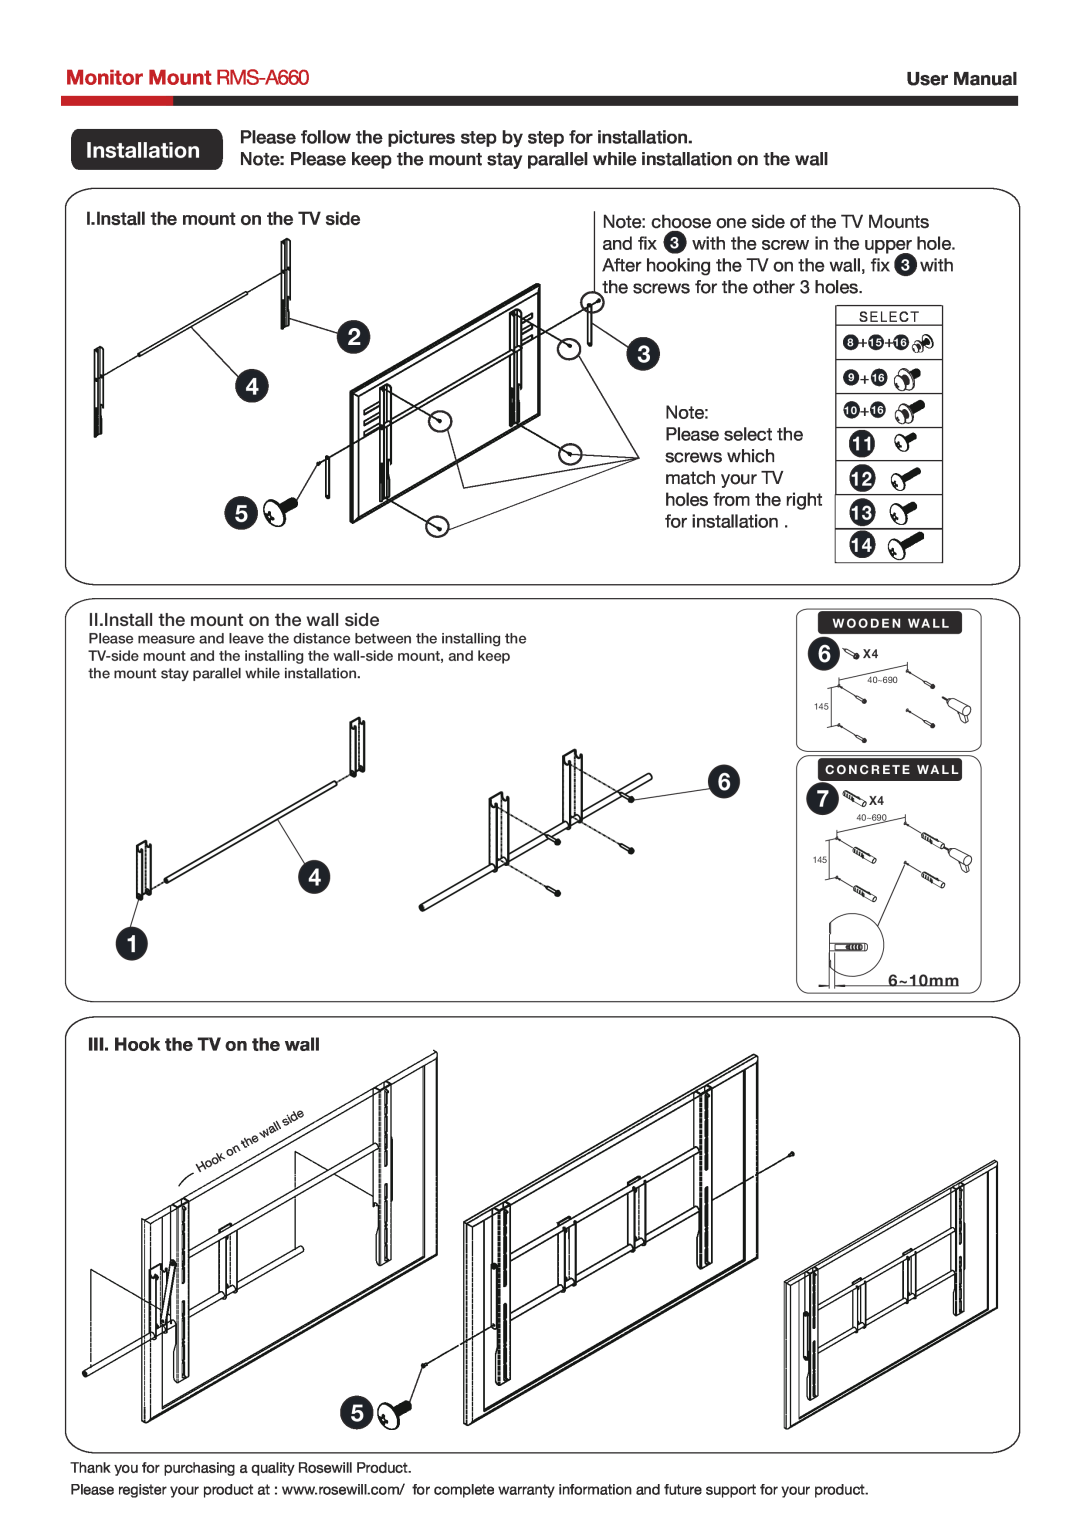 Rosewill RMS-A660 user manual Installation, III. Hook the TV on the wall 